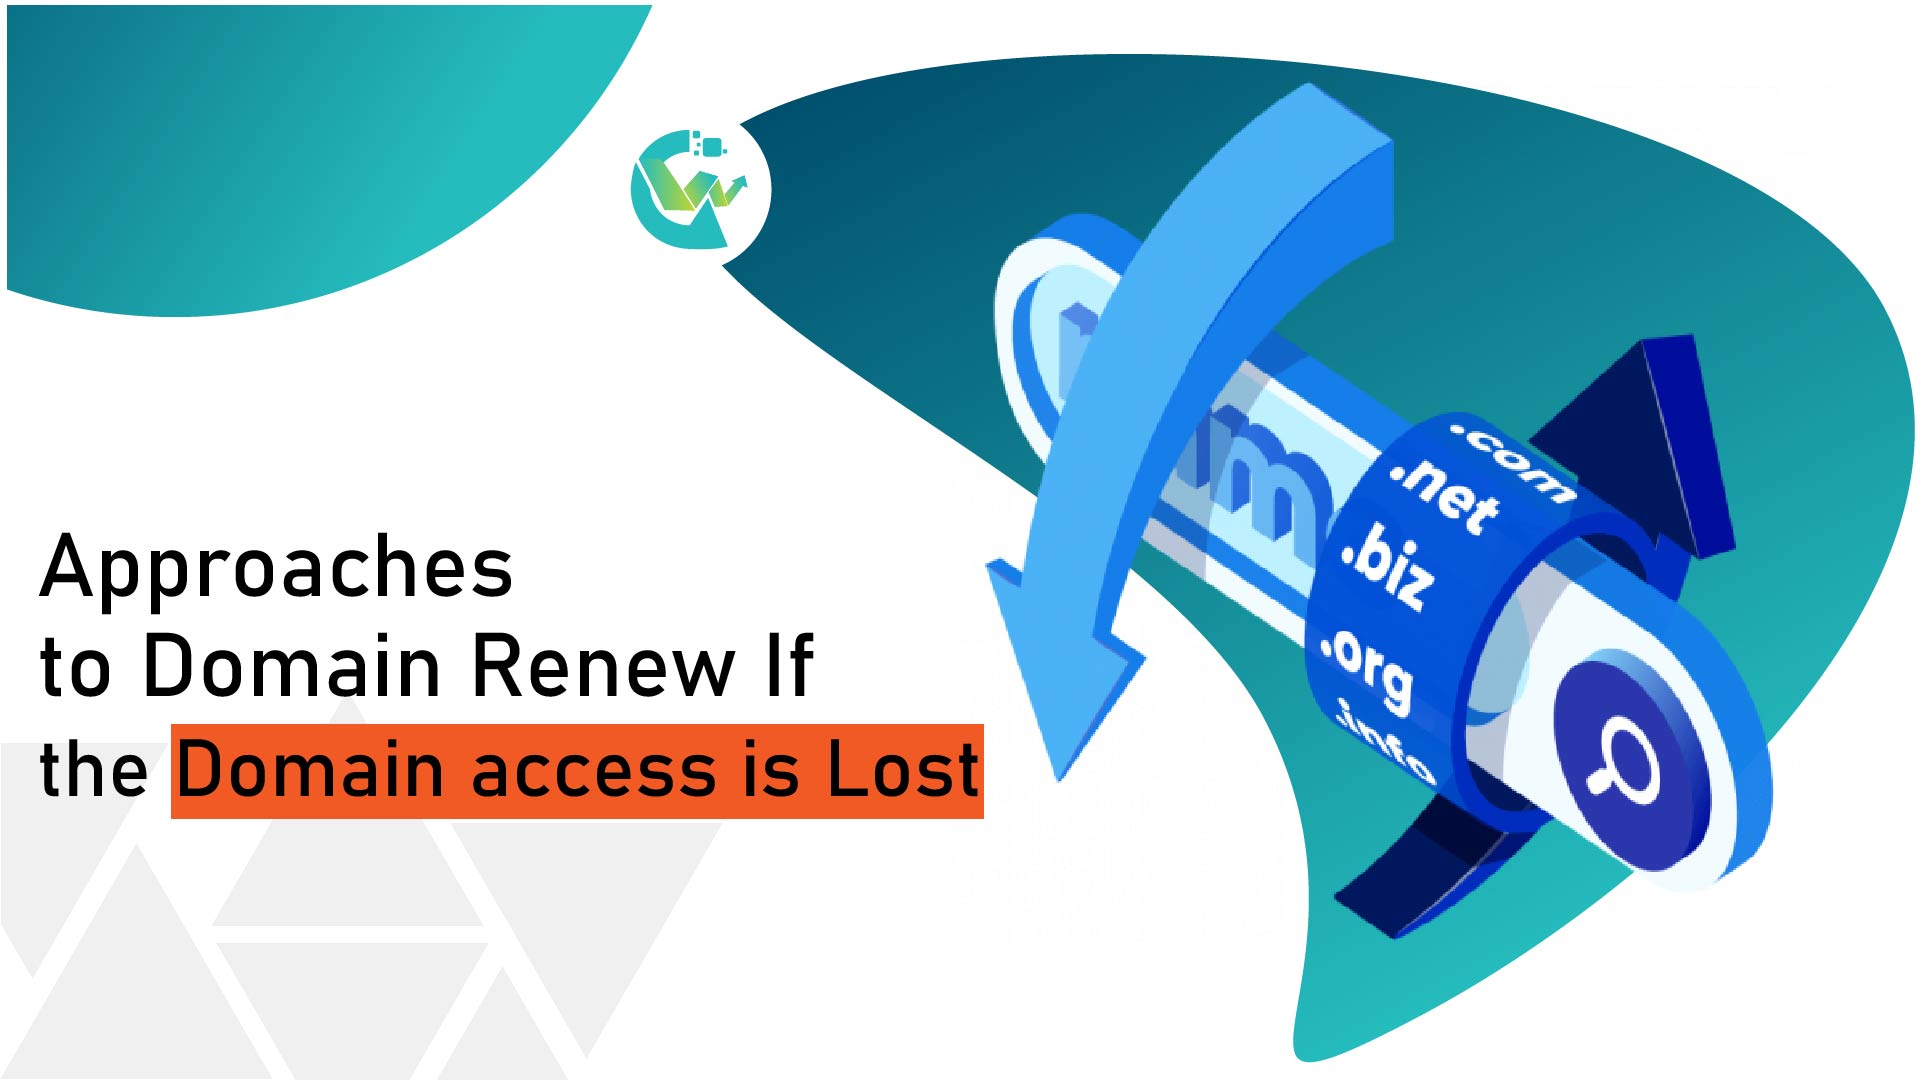 Approaches to Domain Renew If the Domain access is Lost